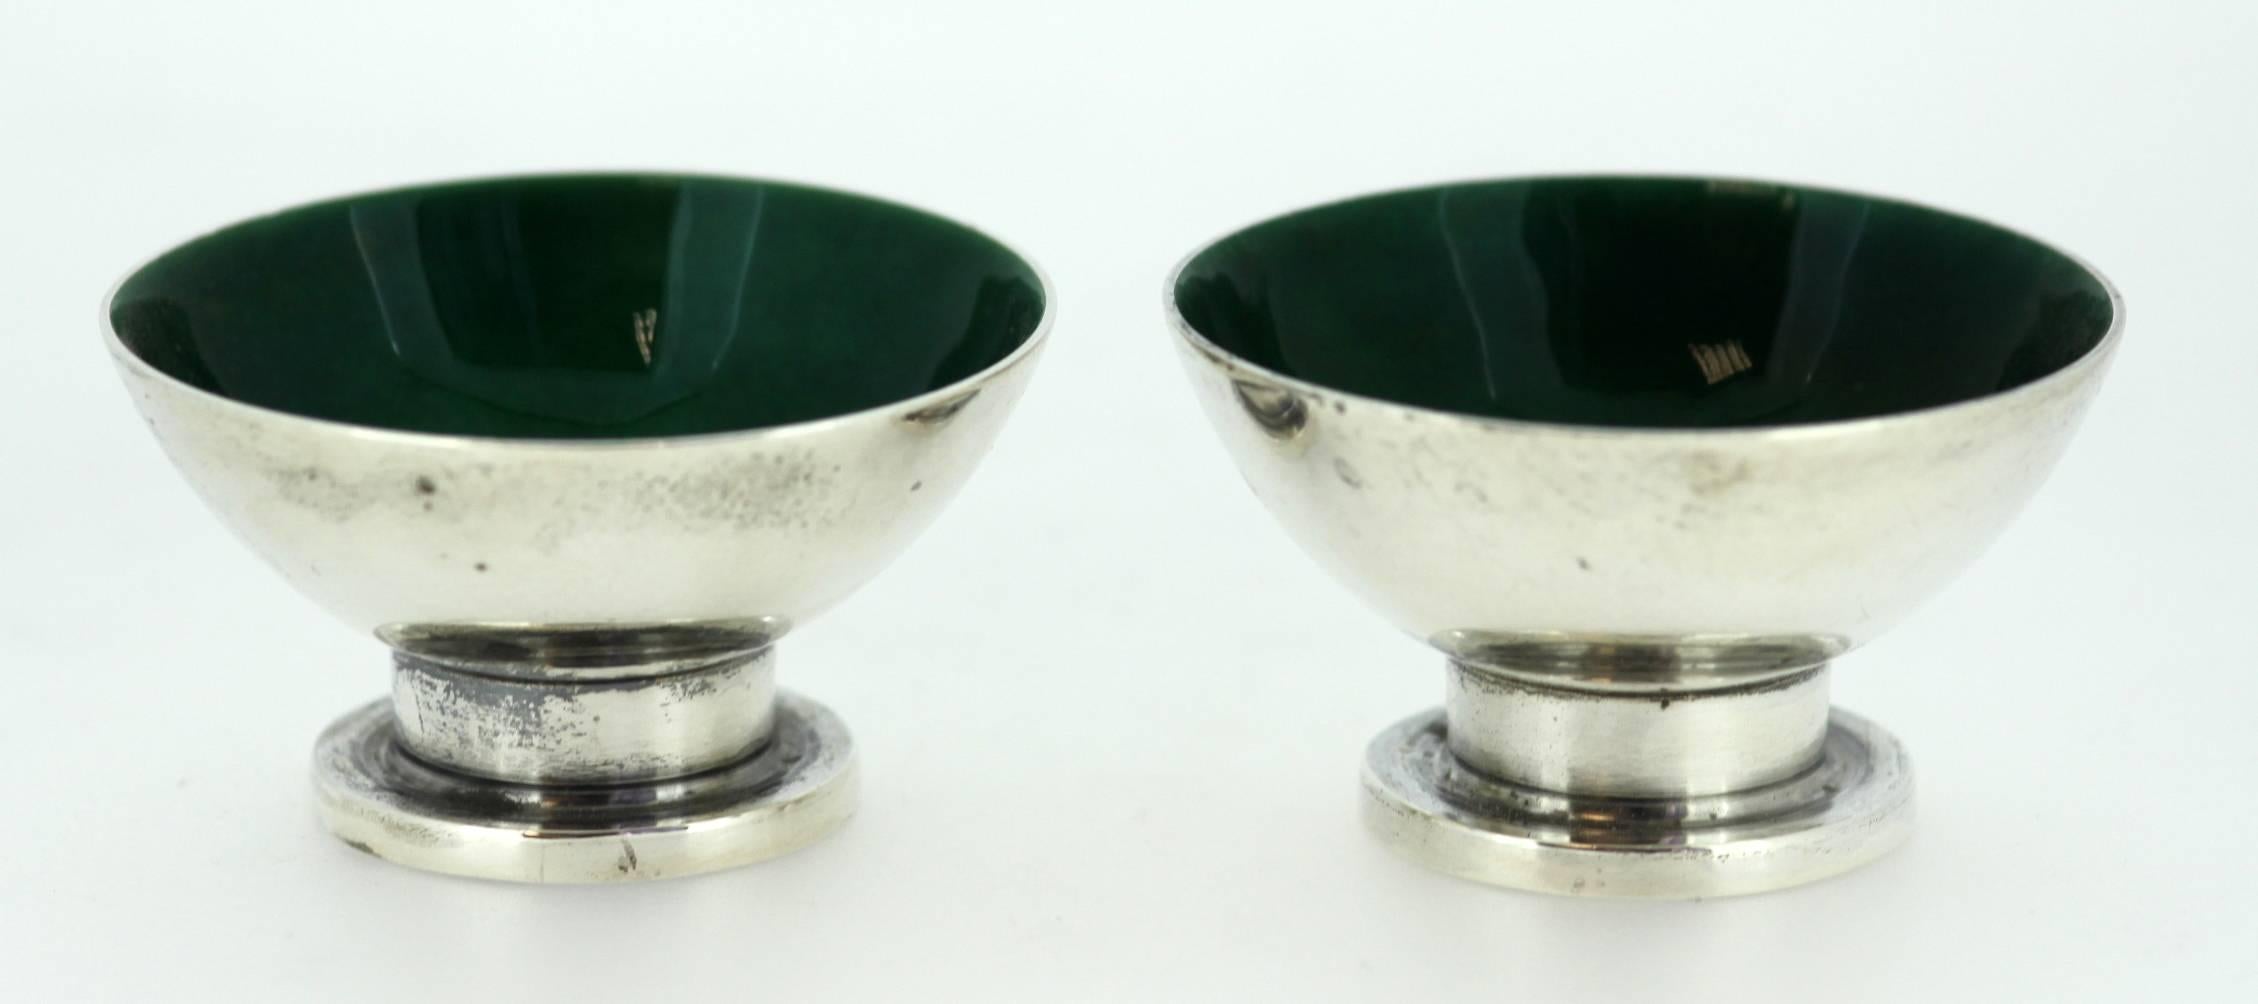 Vintage sterling silver and green enamel pair of egg holders 
Made in USA, circa 1980 
Maker: Georg Jensen USA 
Fully hallmarked. 

Dimensions: 
Diameter x height: 5.55 x 3.2 cm 
Weight: 96 grams total 

Condition: Minor surface wear from